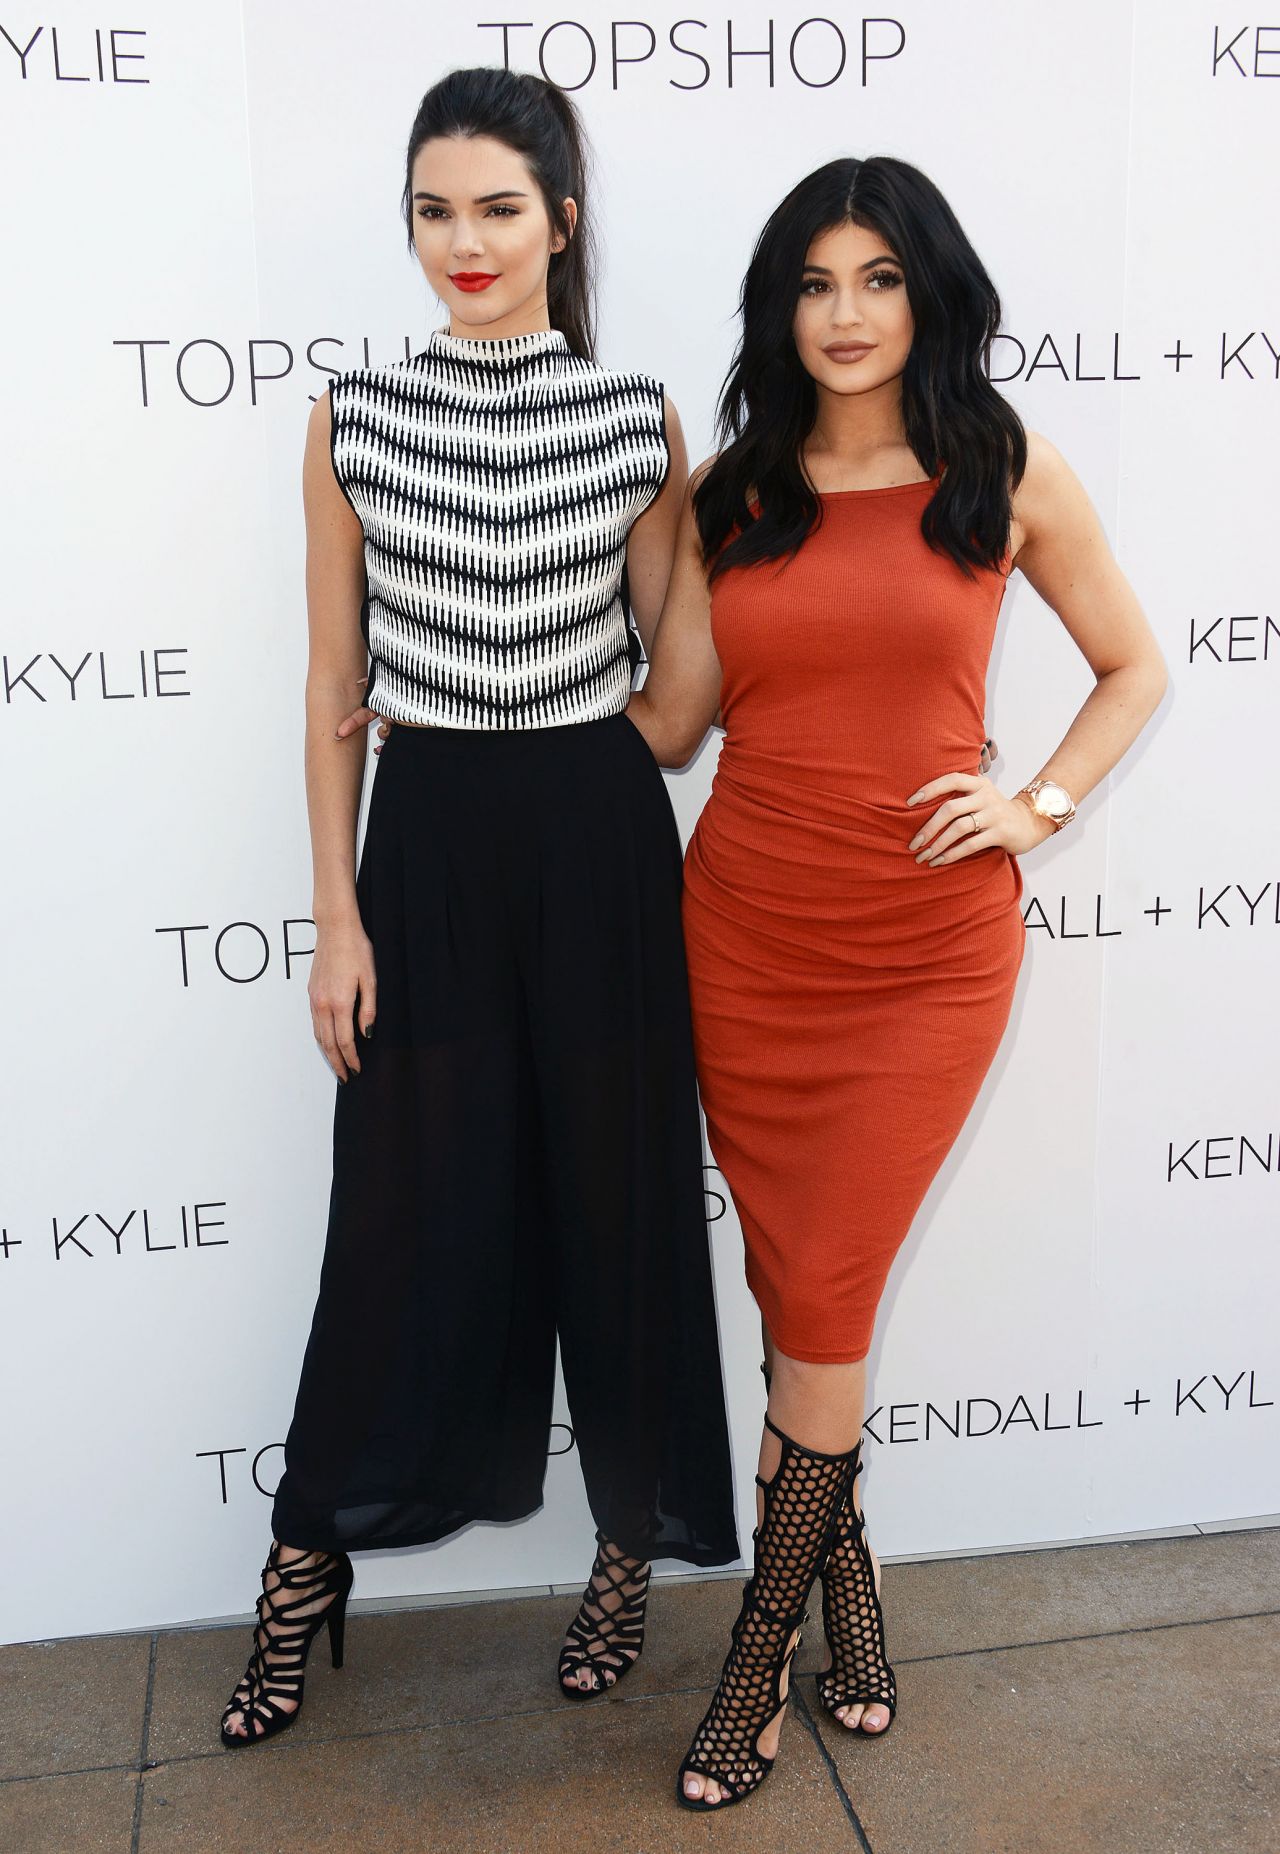 Kendall & Kylie Jenner – Launch Party for the Kendall + Kylie Fashion ...